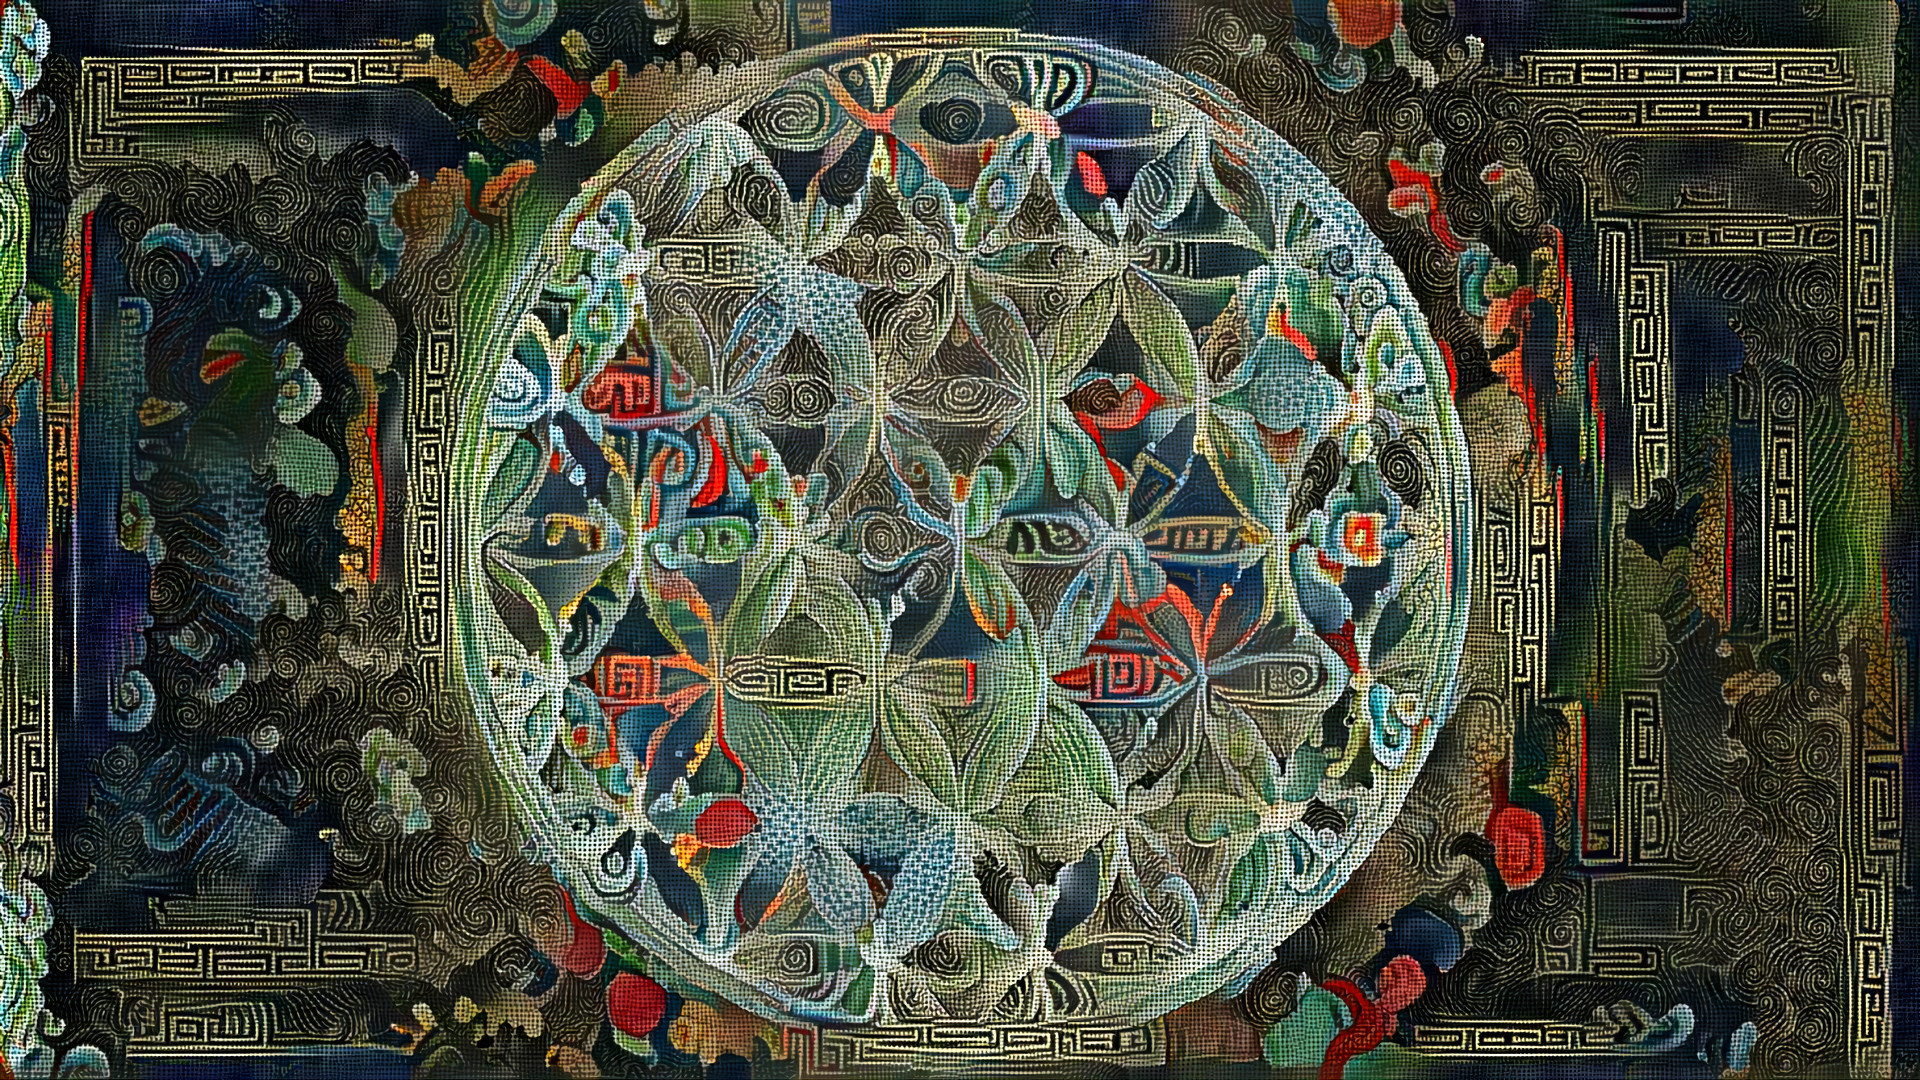 Ancient textile wisdom from the flower of life